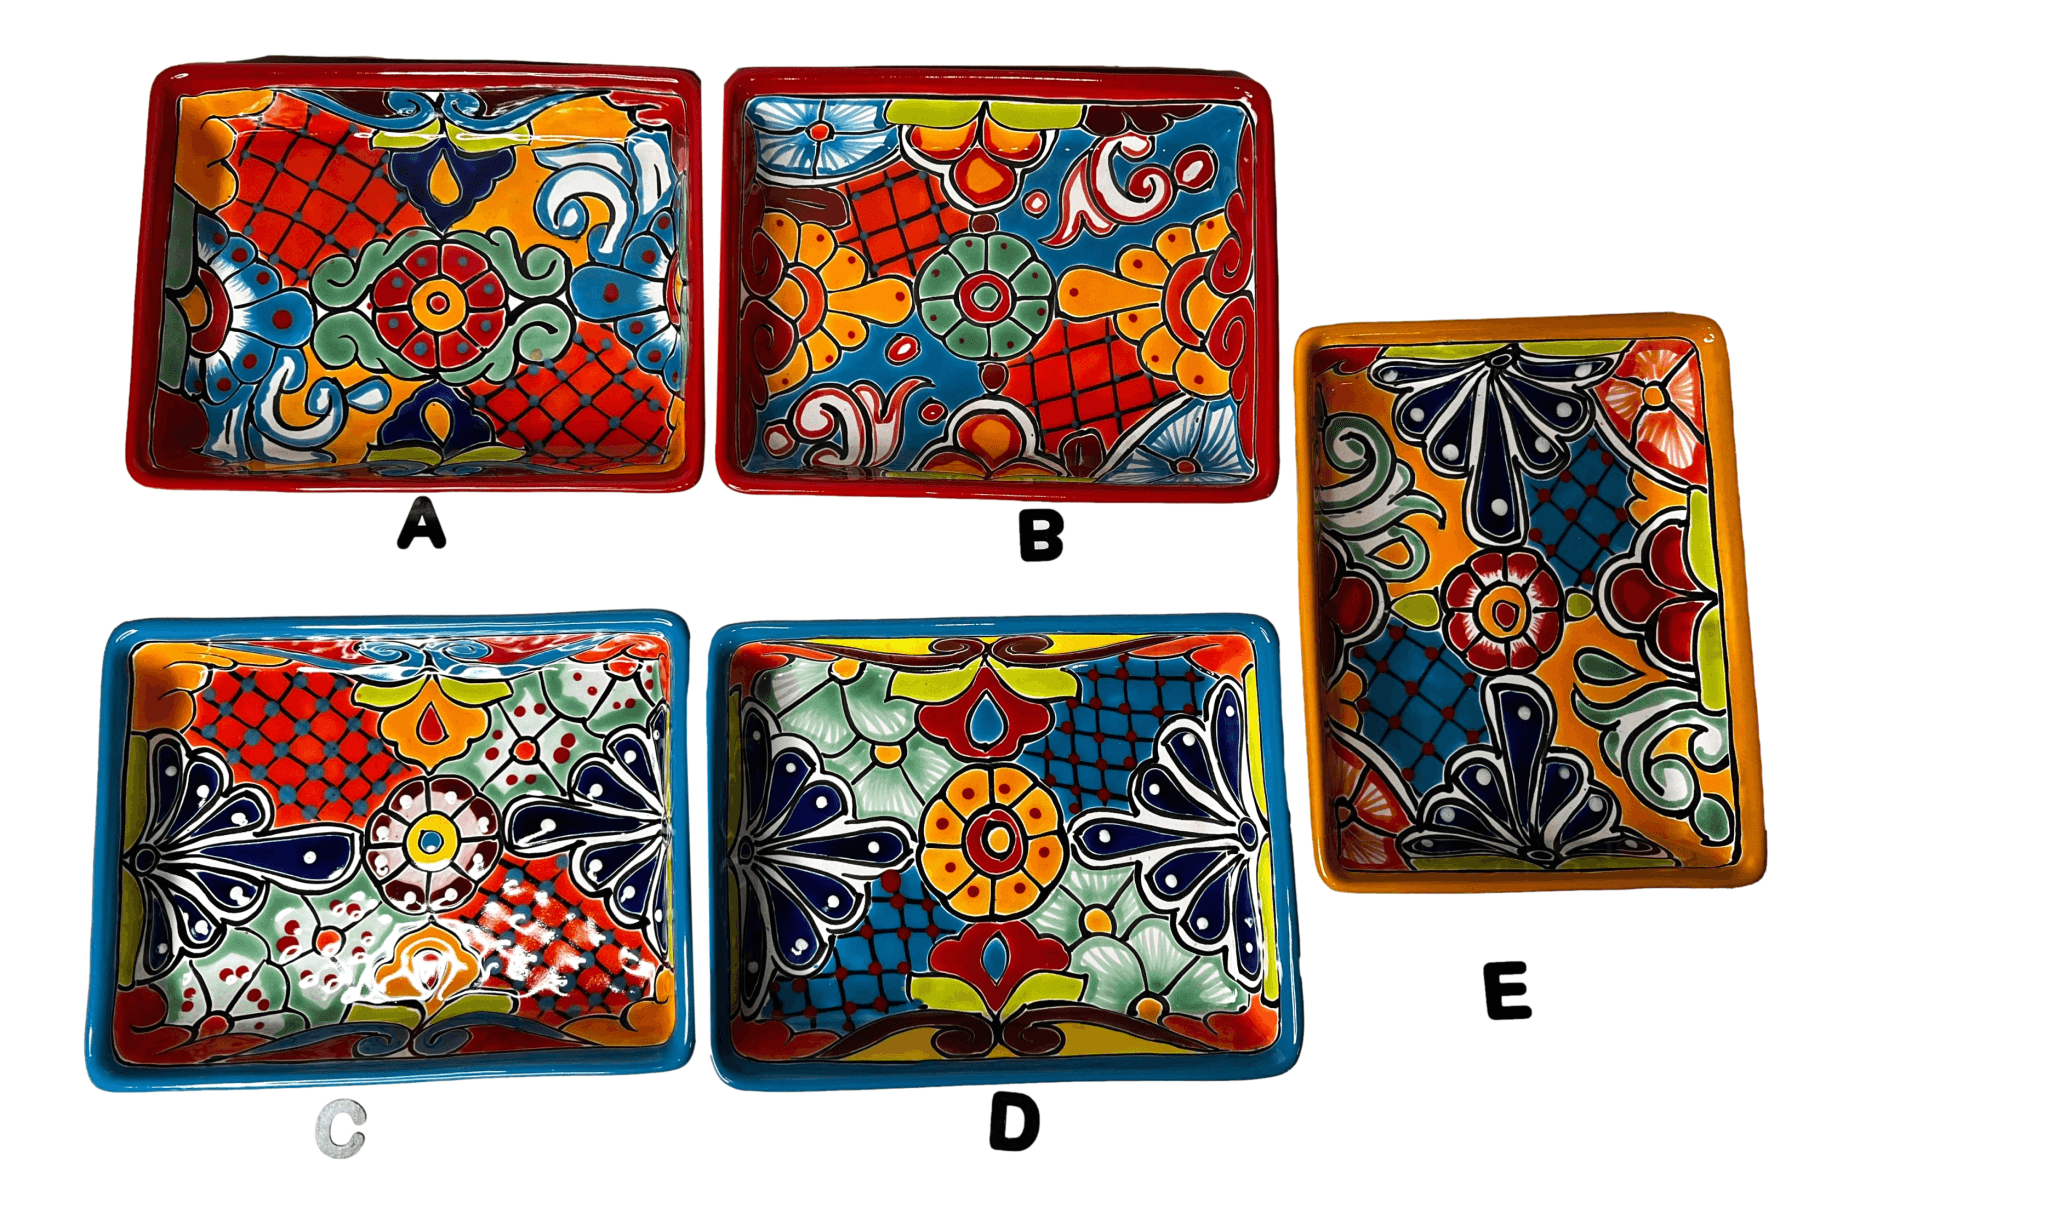 Platter Talavera Dinnerware Food Safe Handcrafted In Mexico W: 8 inches X L: 10 inches X 1.5 inches Deep - Ysleta Mission Gift Shop- VOTED 2022 El Paso's Best Gift Shop